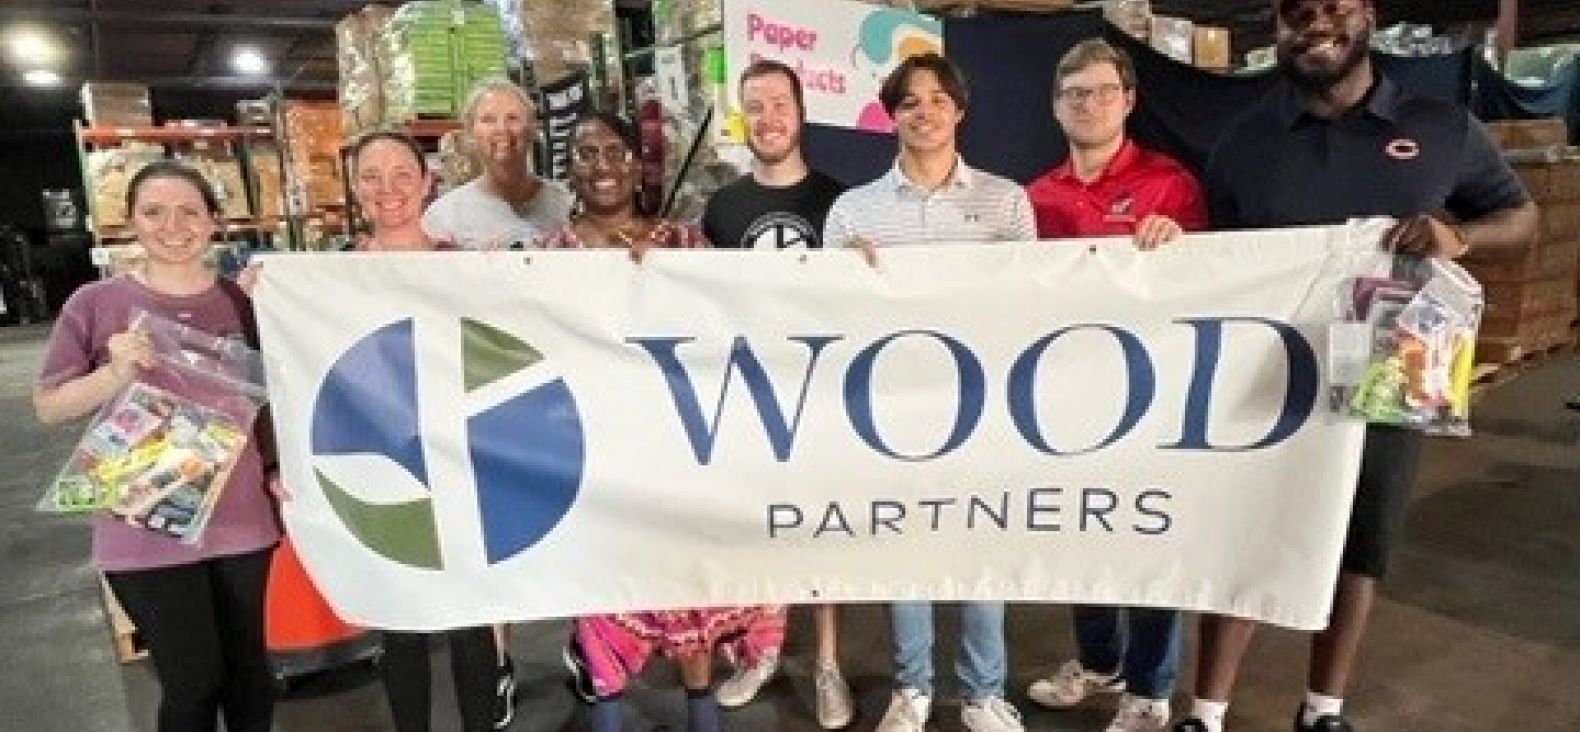 Co-workers hold up a large banner with Wood Partners logo